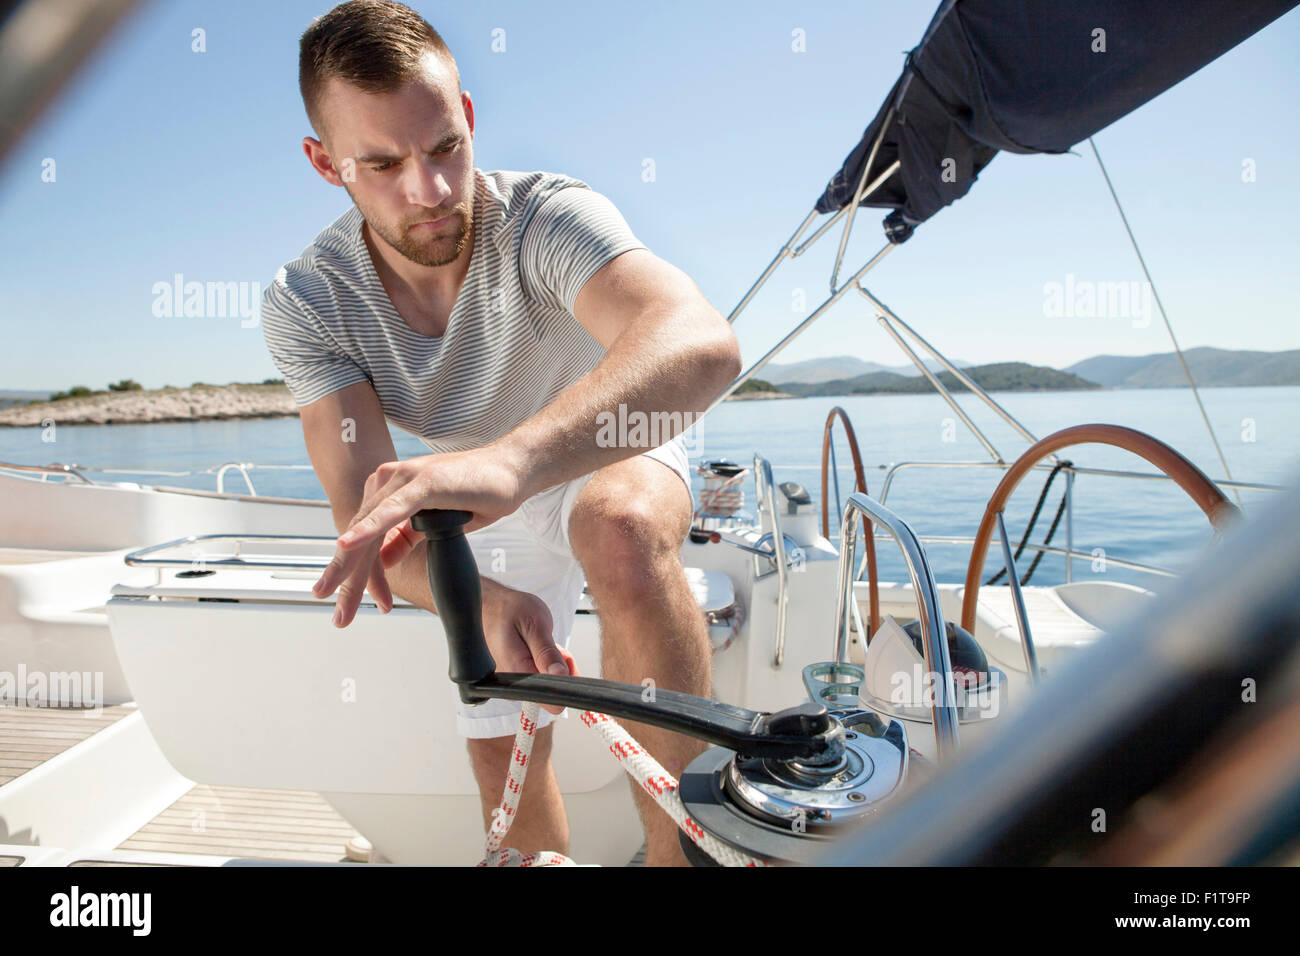 Man turning on cable winch on sailboat, Adriatic Sea Stock Photo